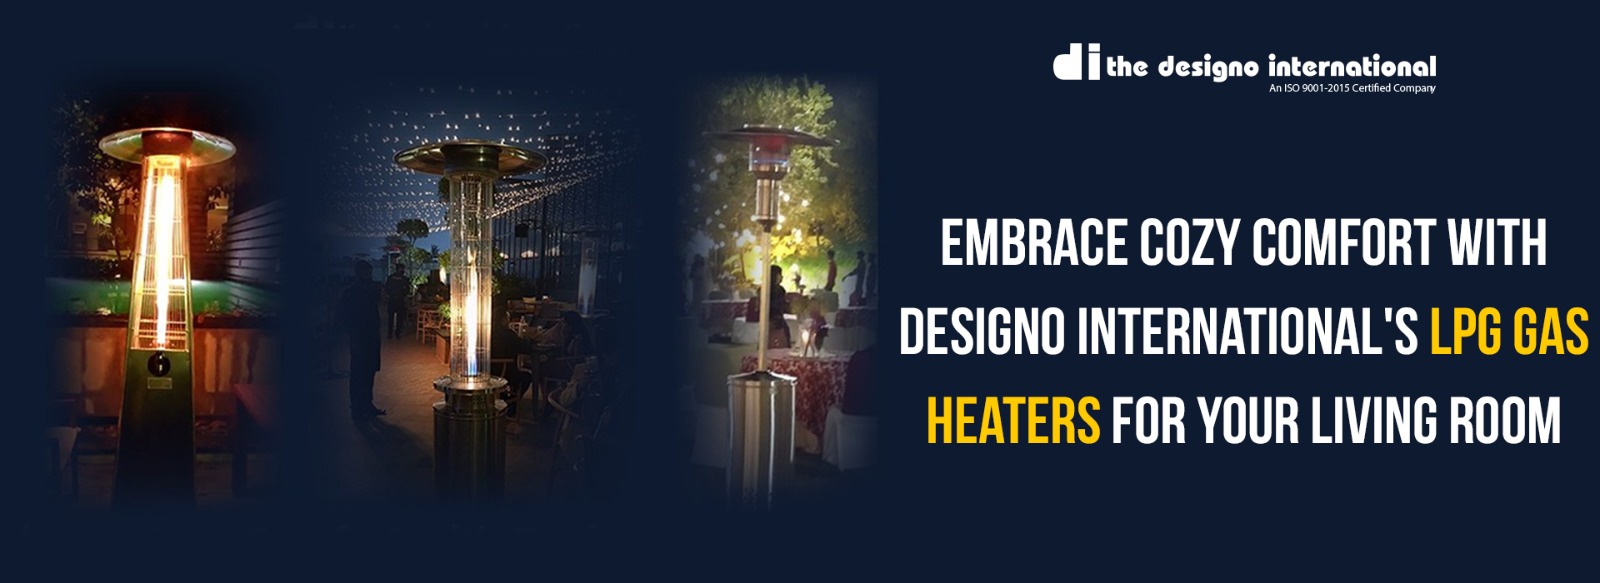 Embrace Cozy Comfort with The Designo International’s LPG Gas Heaters for Your Living Room